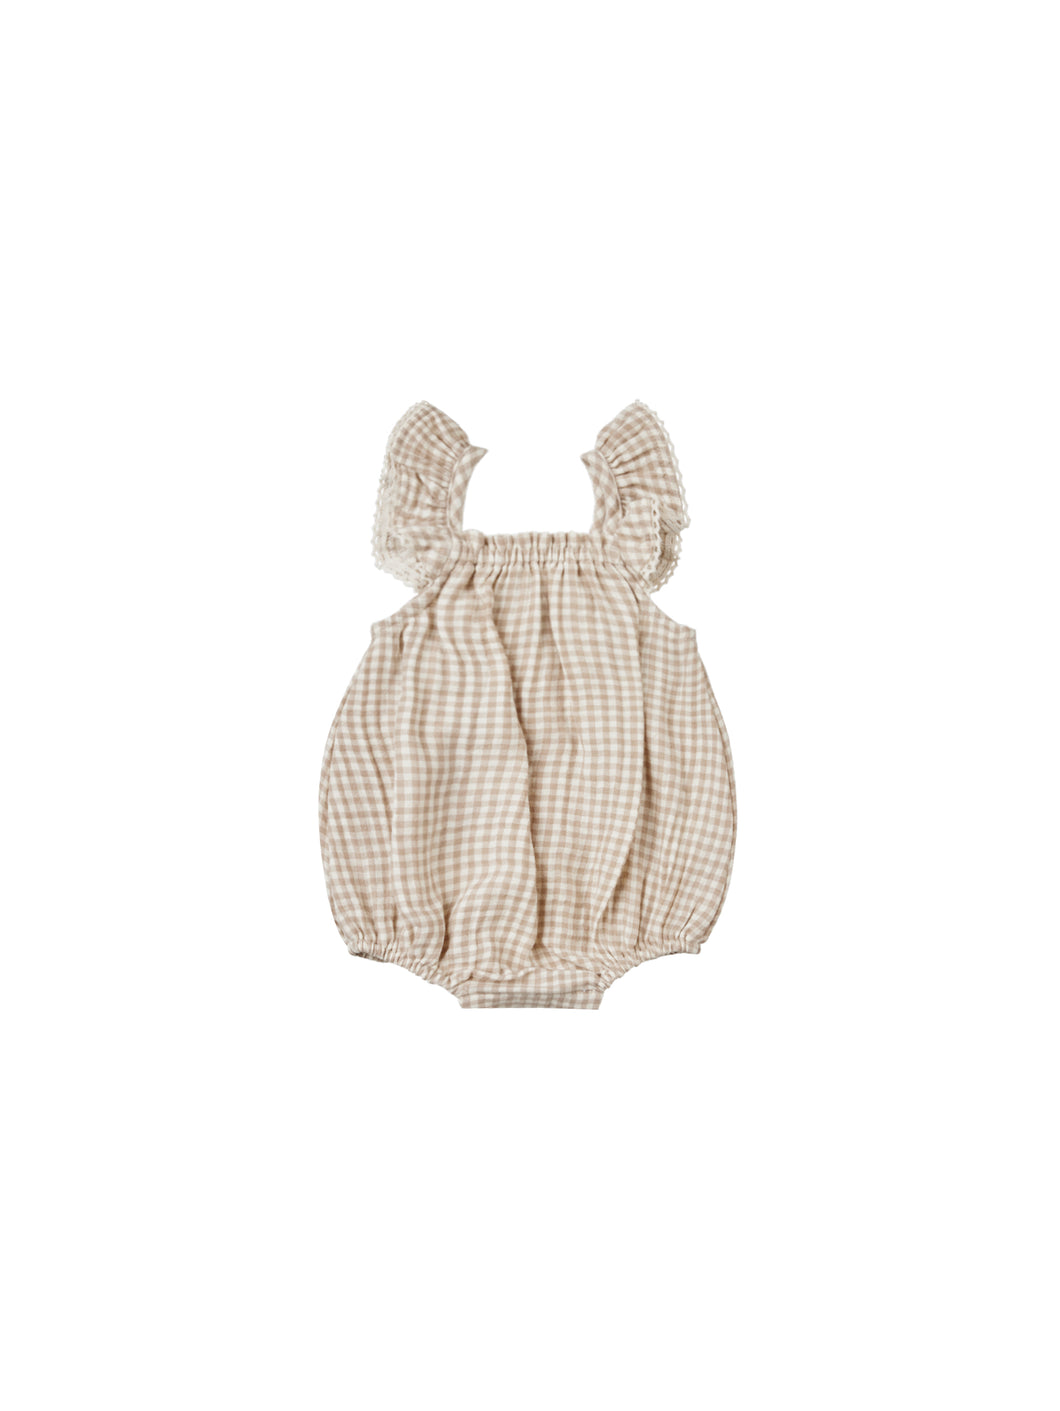 Flutter sleeves baby romper featured in a beige and oat gingham print. 